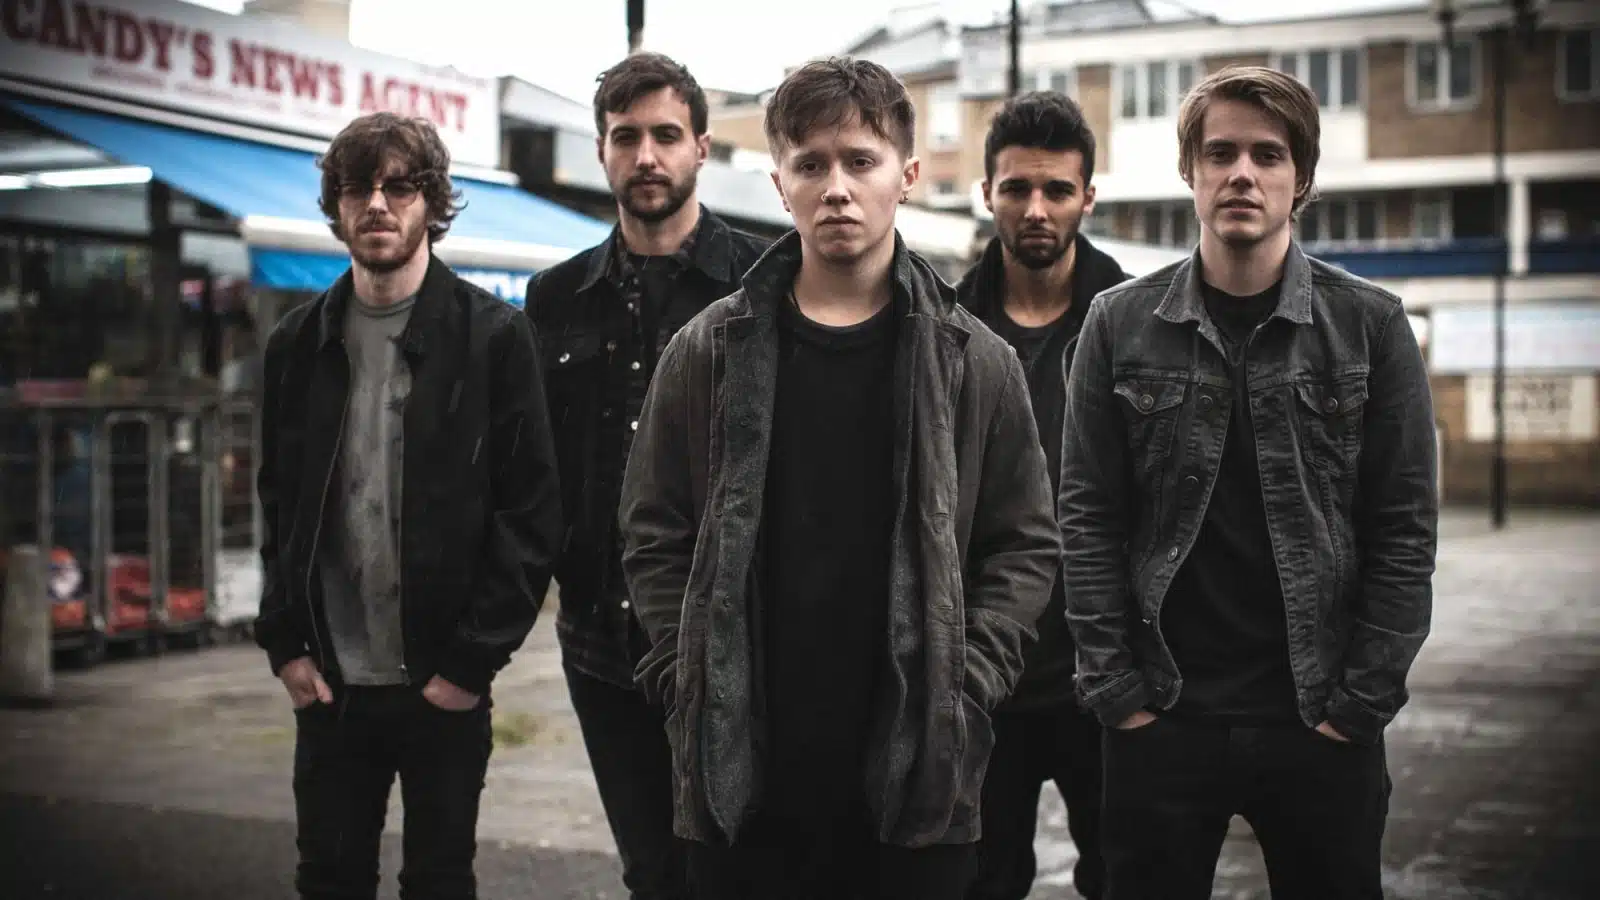 Nothing but Thieves Songs Ranked